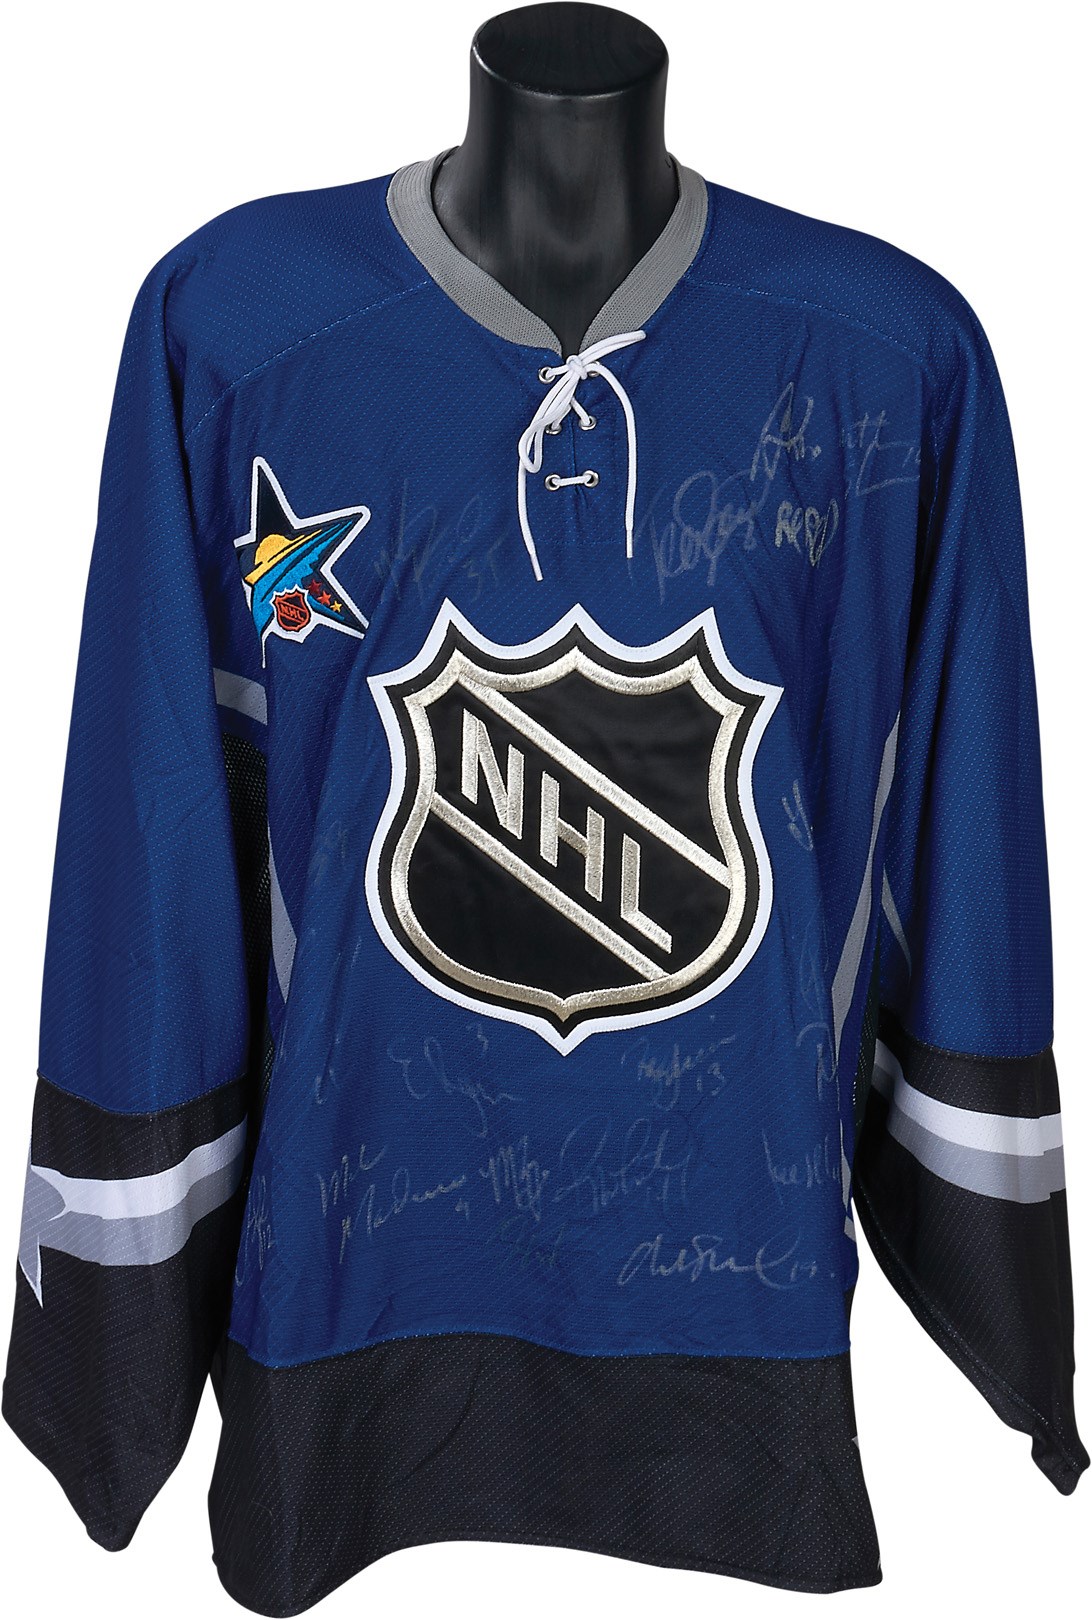 2002-03 NHL Western Conference All-Star Team-Signed Jersey